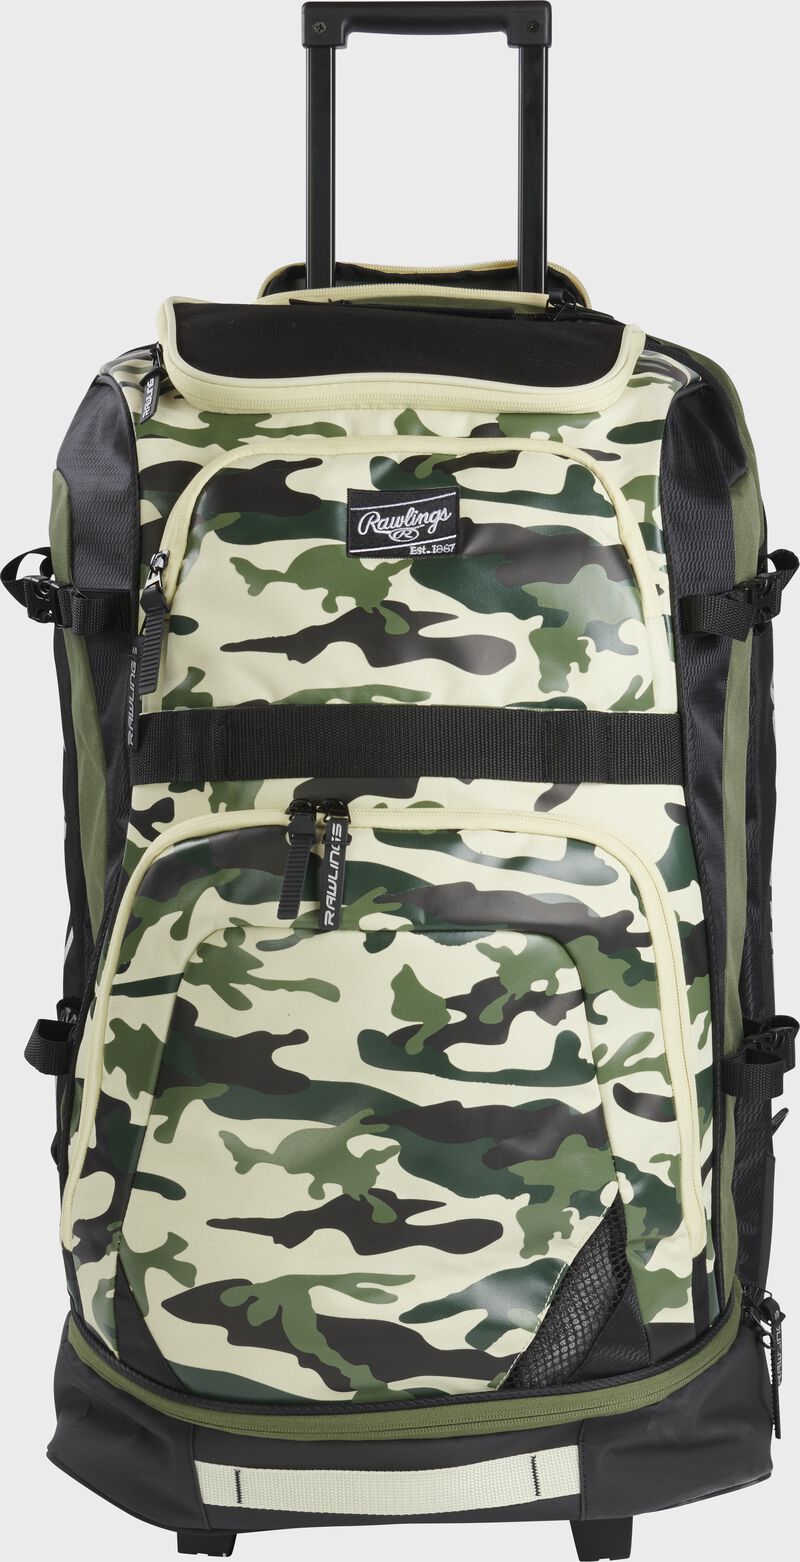 Front view of camo Rawlings Wheeled Catcher's Backpack - SKU: R1801